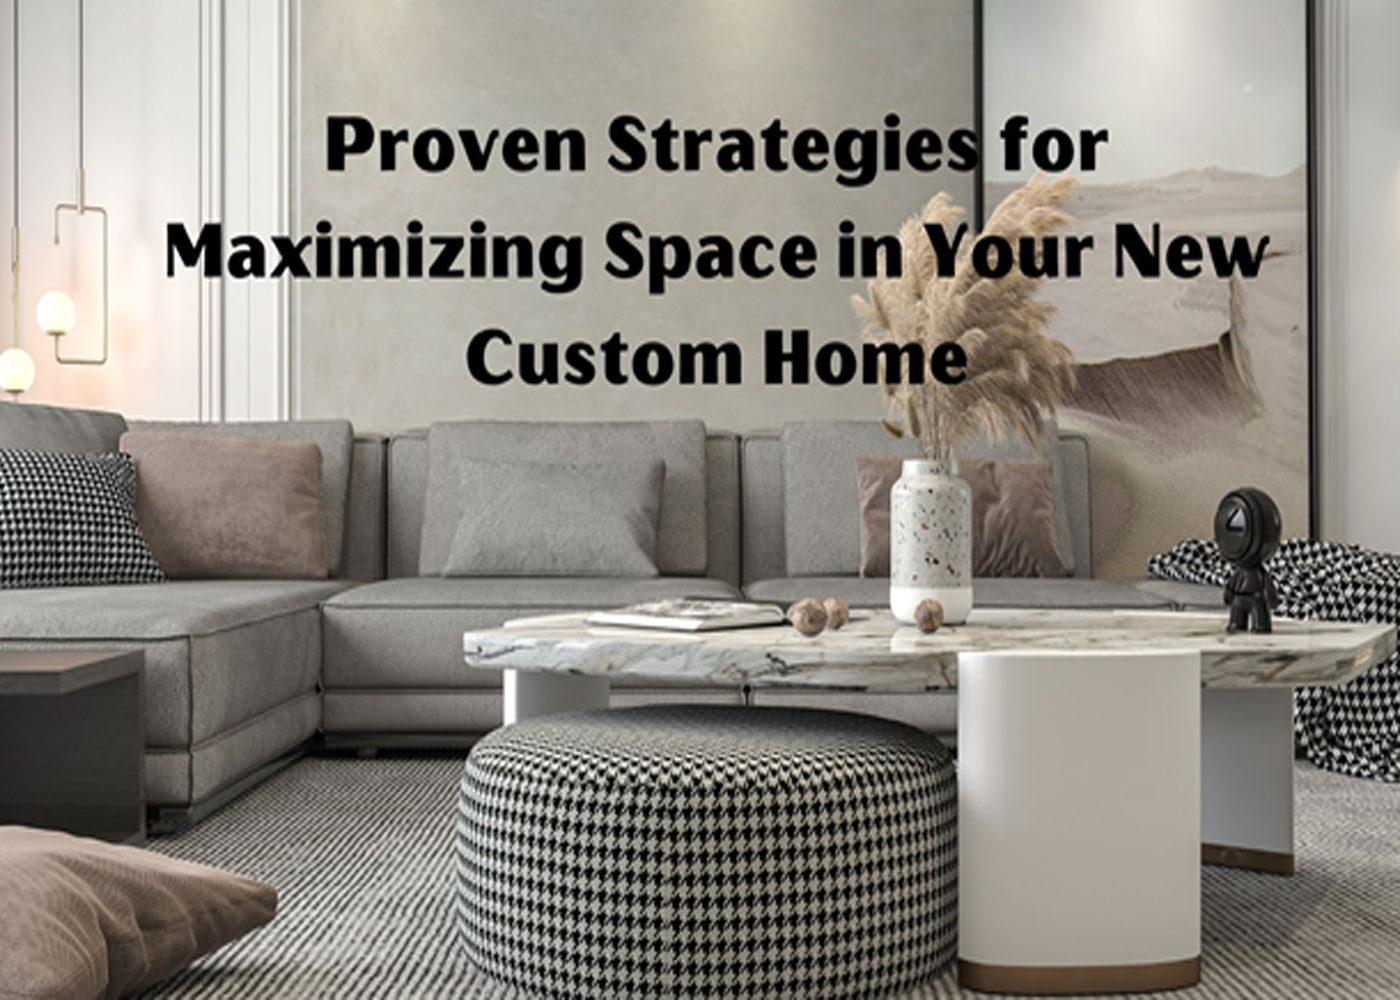 Proven Strategies for Maximizing Space in Your New Custom Home